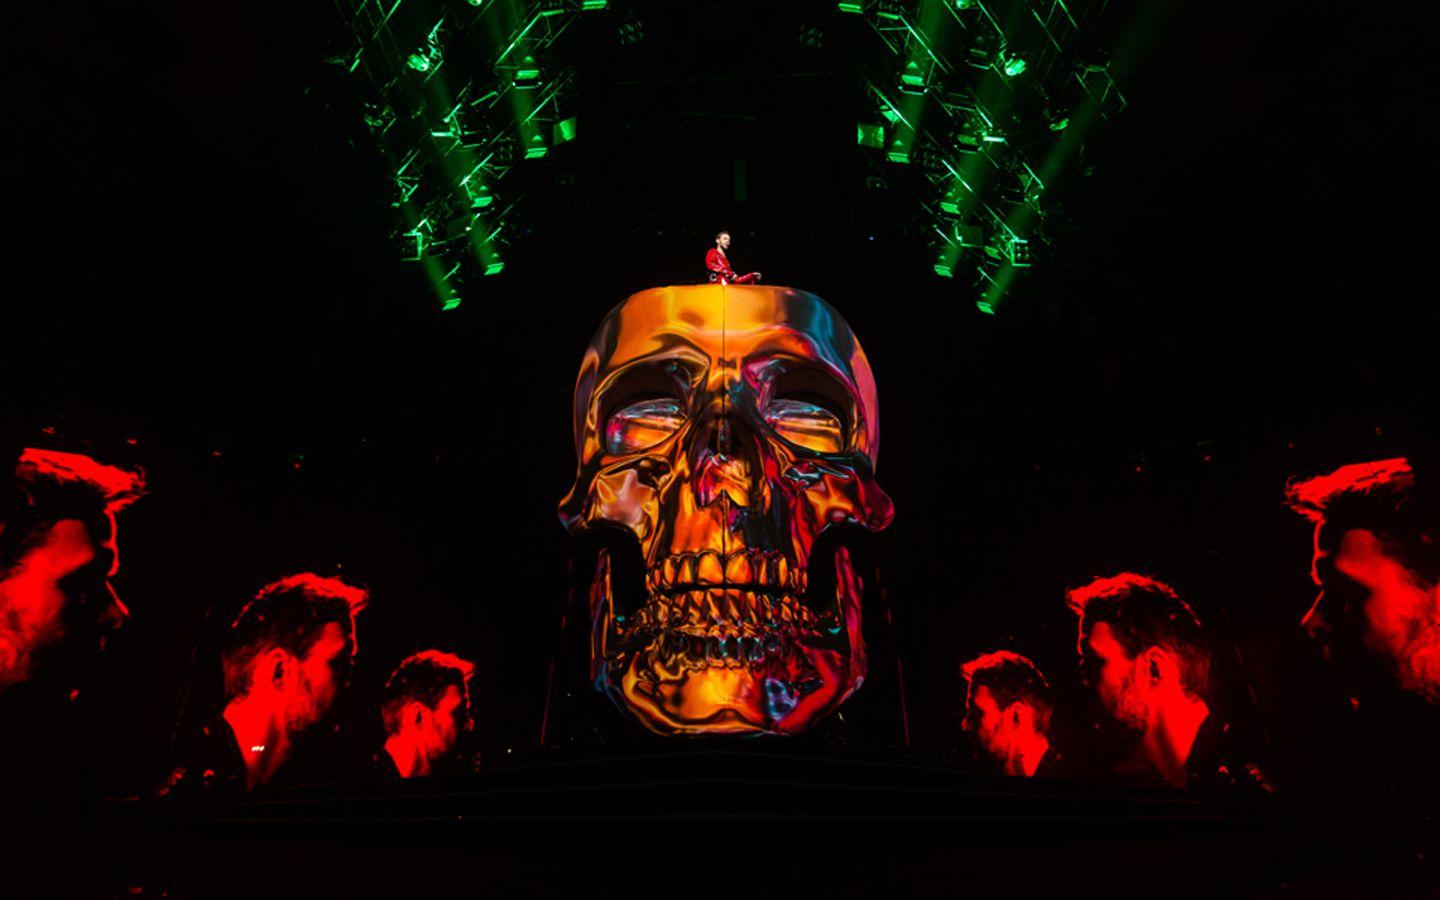 Projection mapping onto a large scale skull prop at Max Barskih Concert